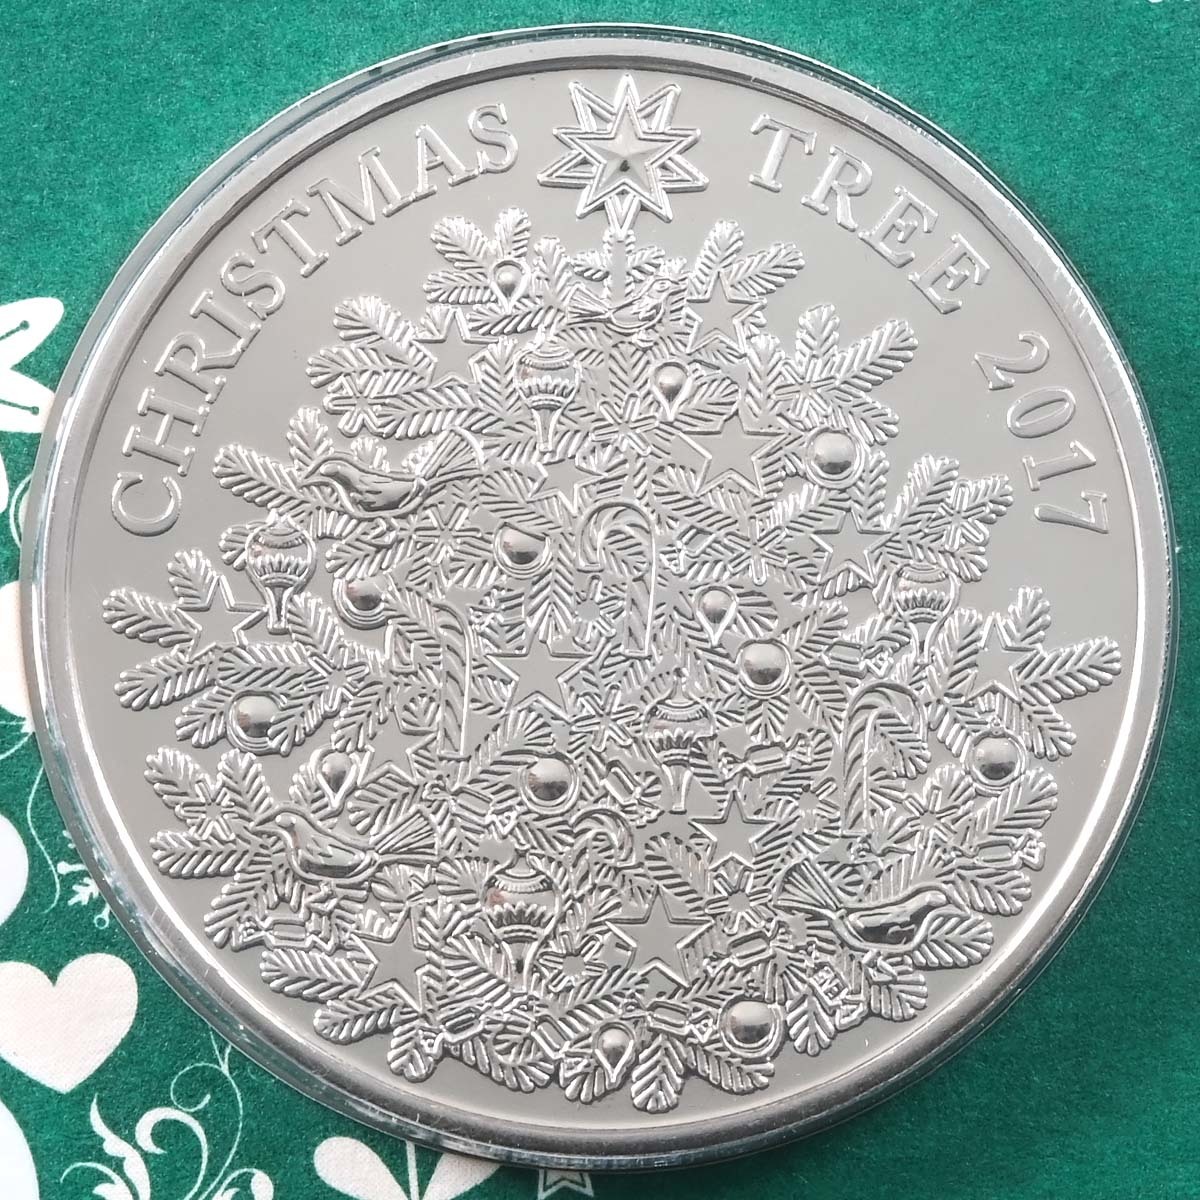 Uk17CTBU 2017 Christmas Tree Five Pound Crown Brilliant Uncirculated Coin In Folder Reverse